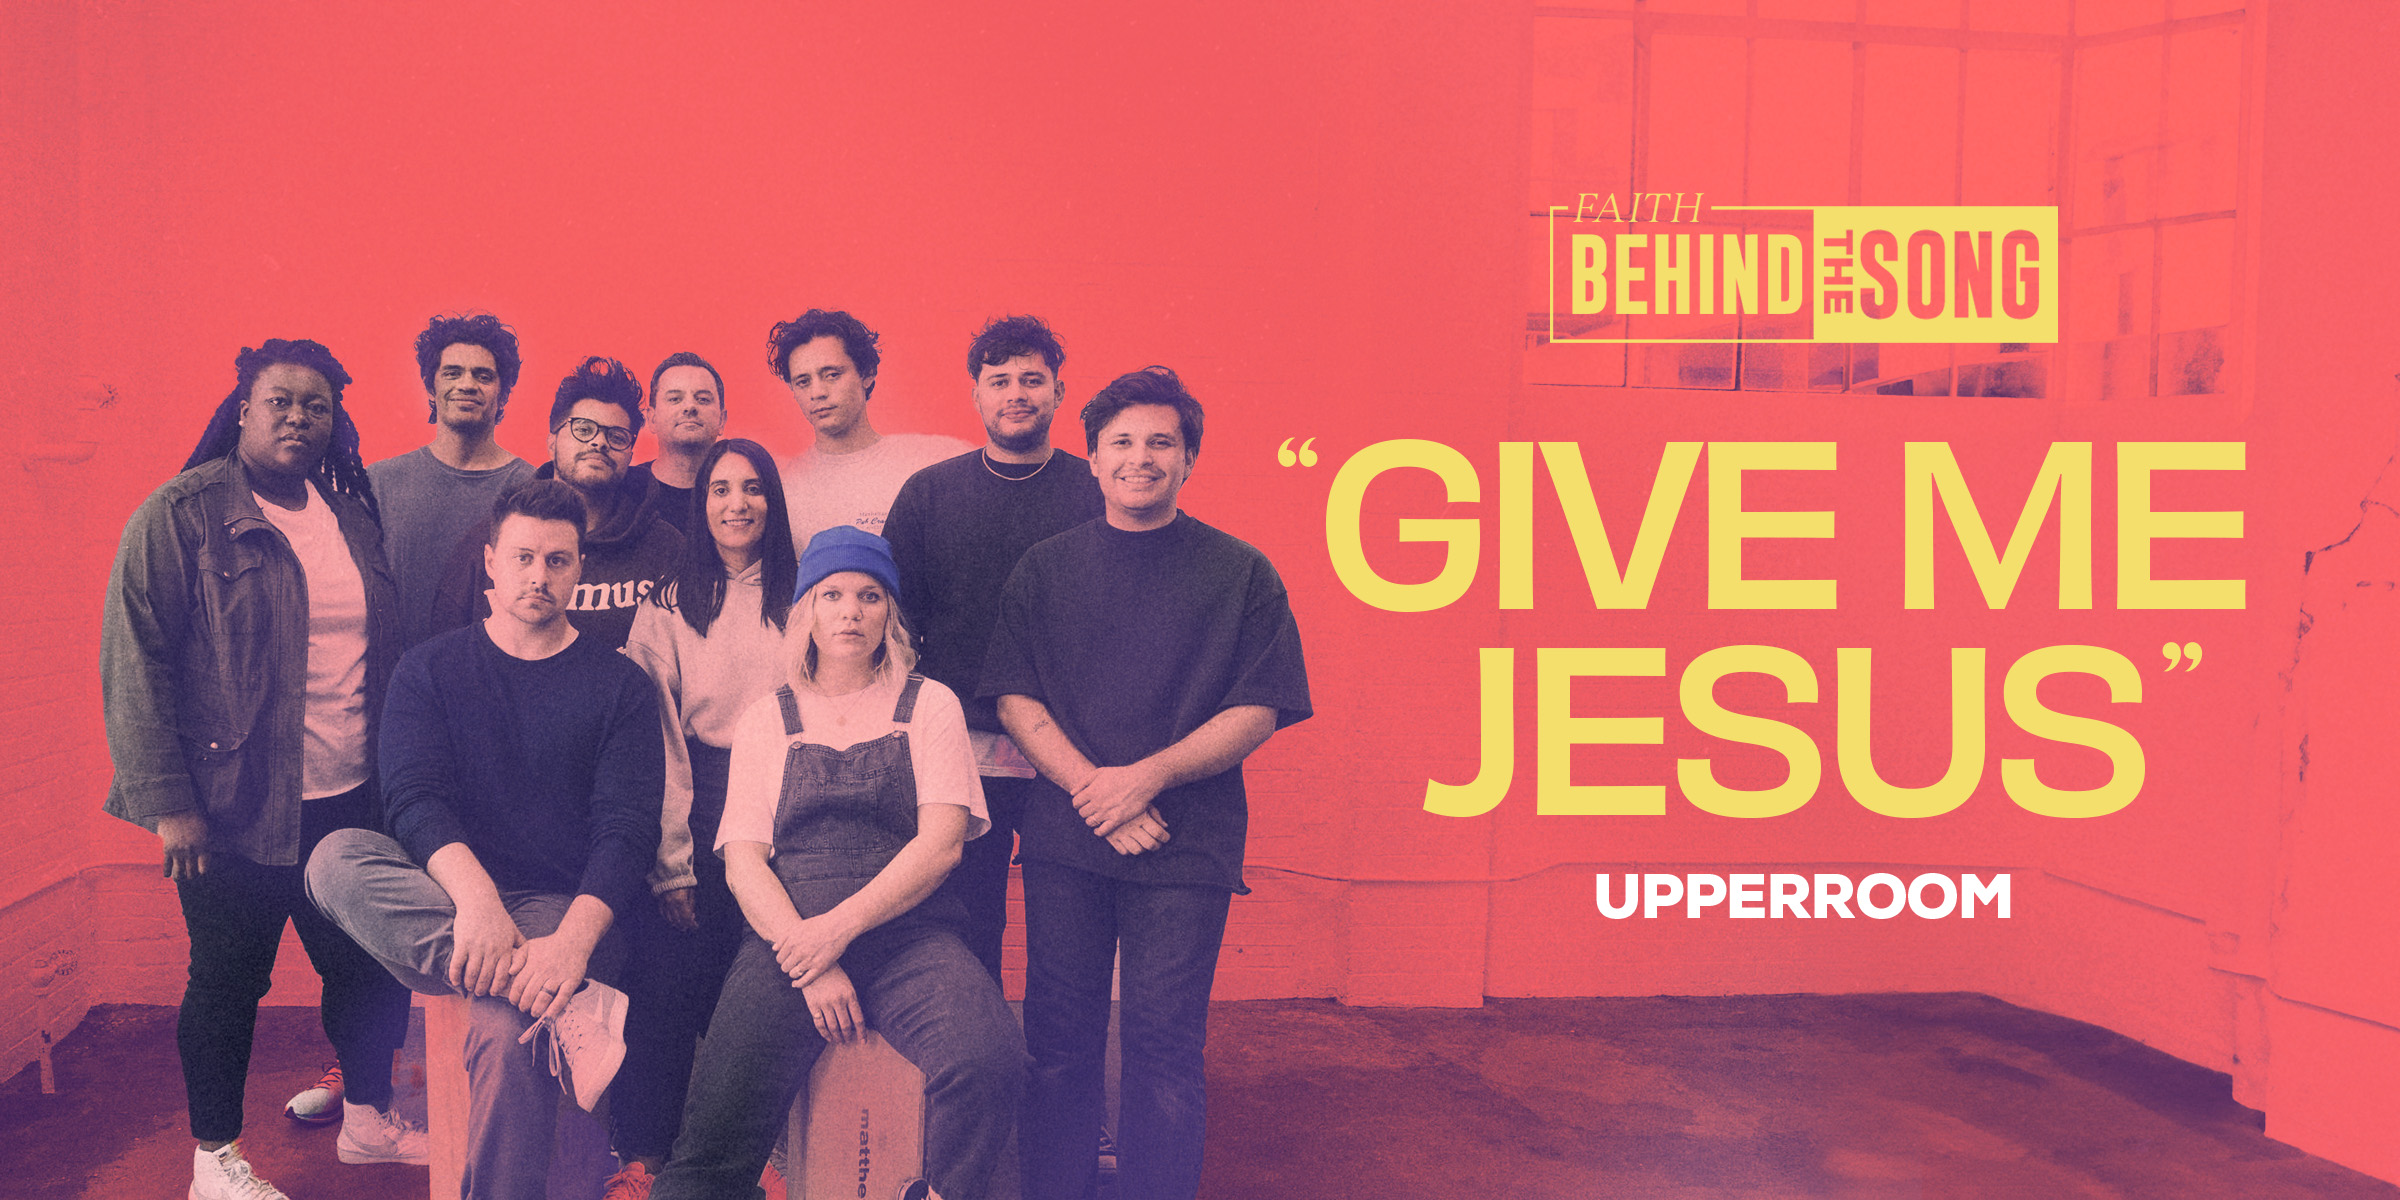 Faith Behind The Song: "Give Me Jesus" UPPERROOM